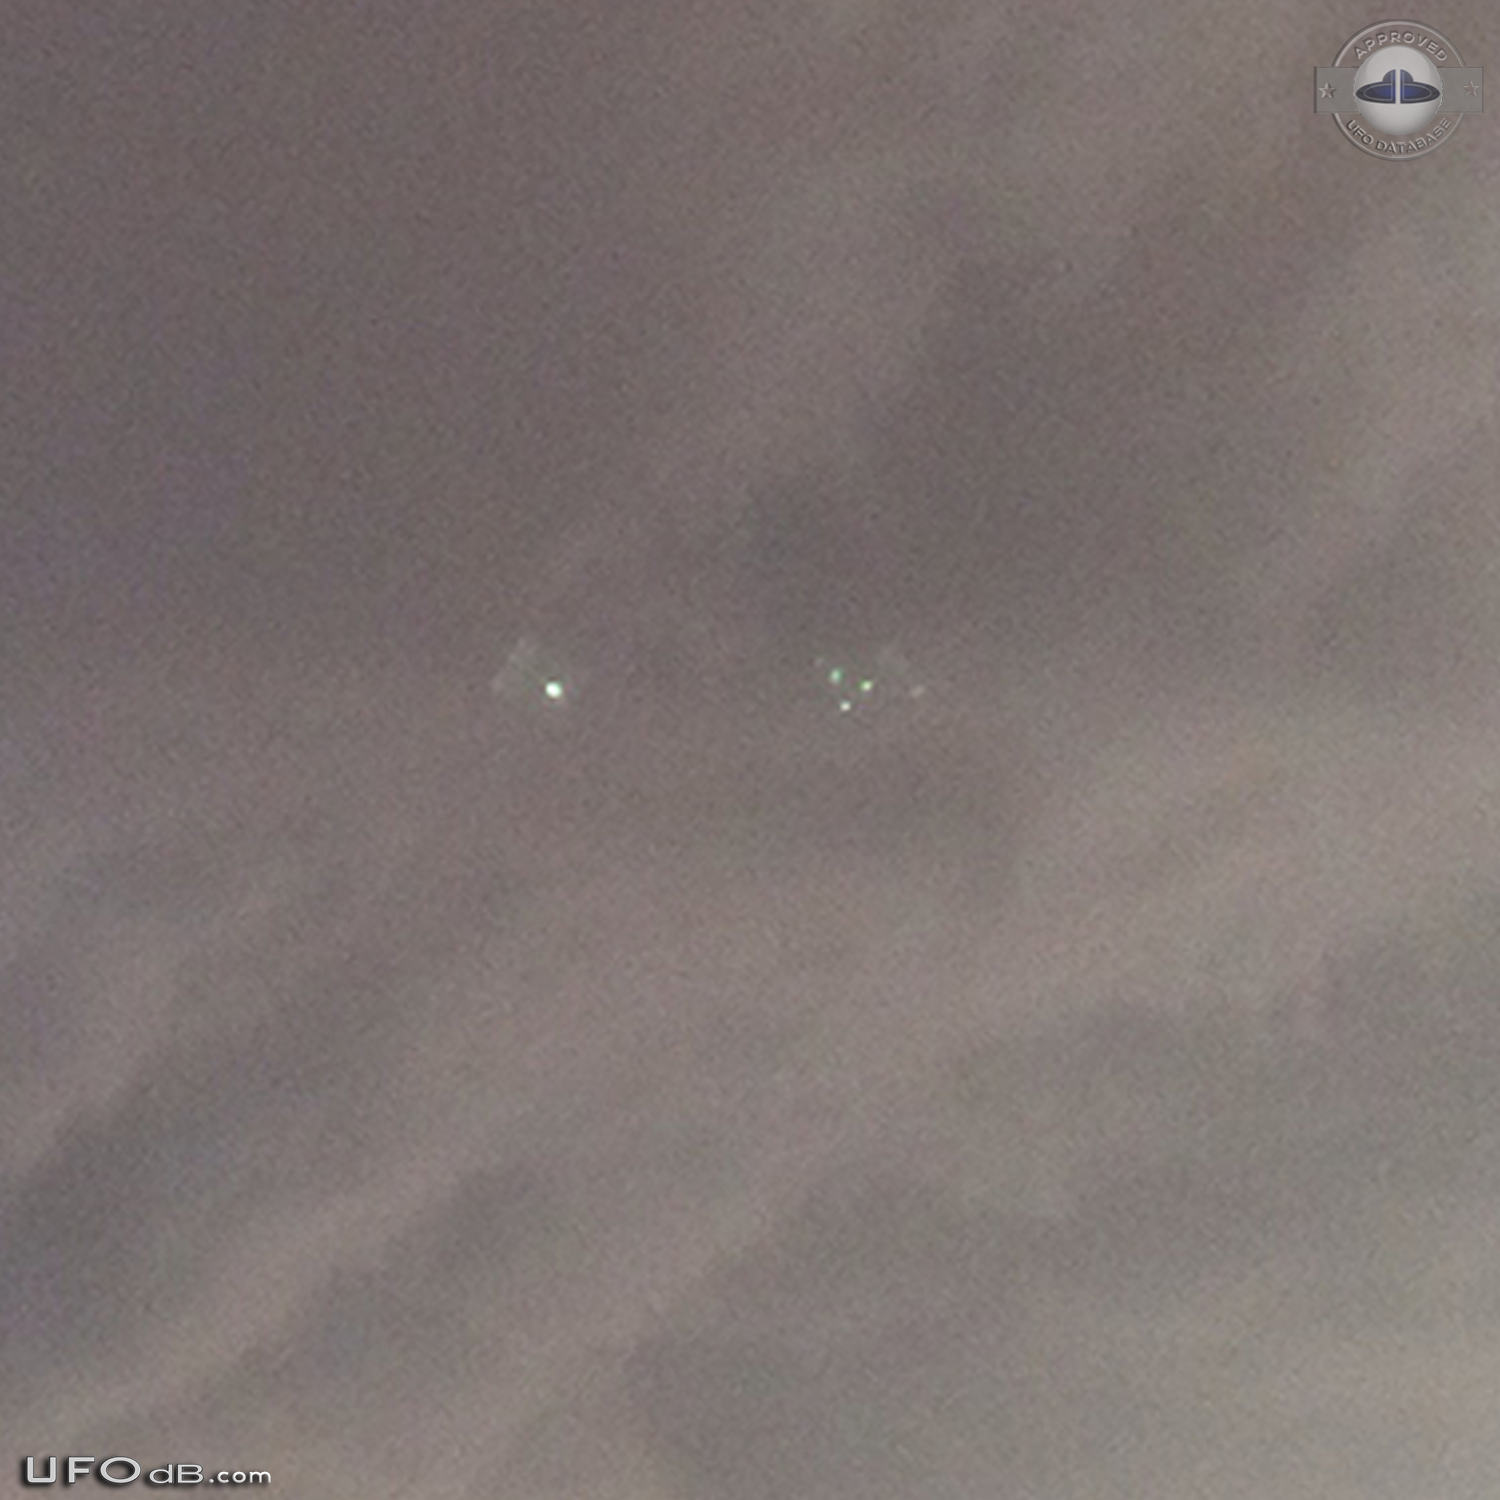 Diamond UFO hiding in the storm caught on picture over Katy Texas 2014 UFO Picture #573-4